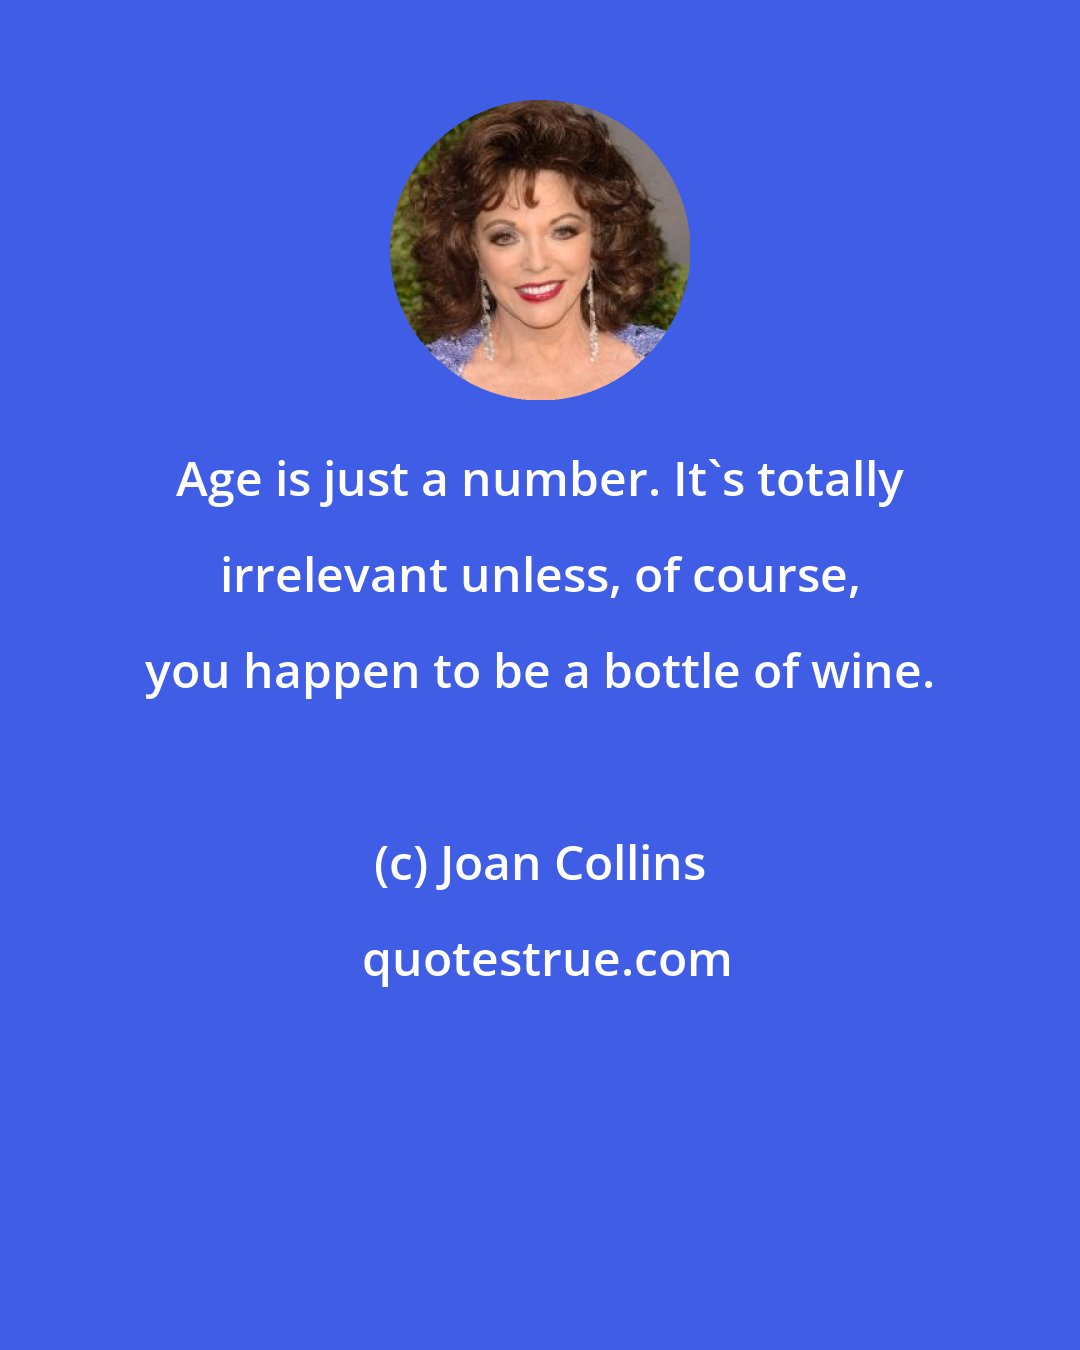 Joan Collins: Age is just a number. It's totally irrelevant unless, of course, you happen to be a bottle of wine.